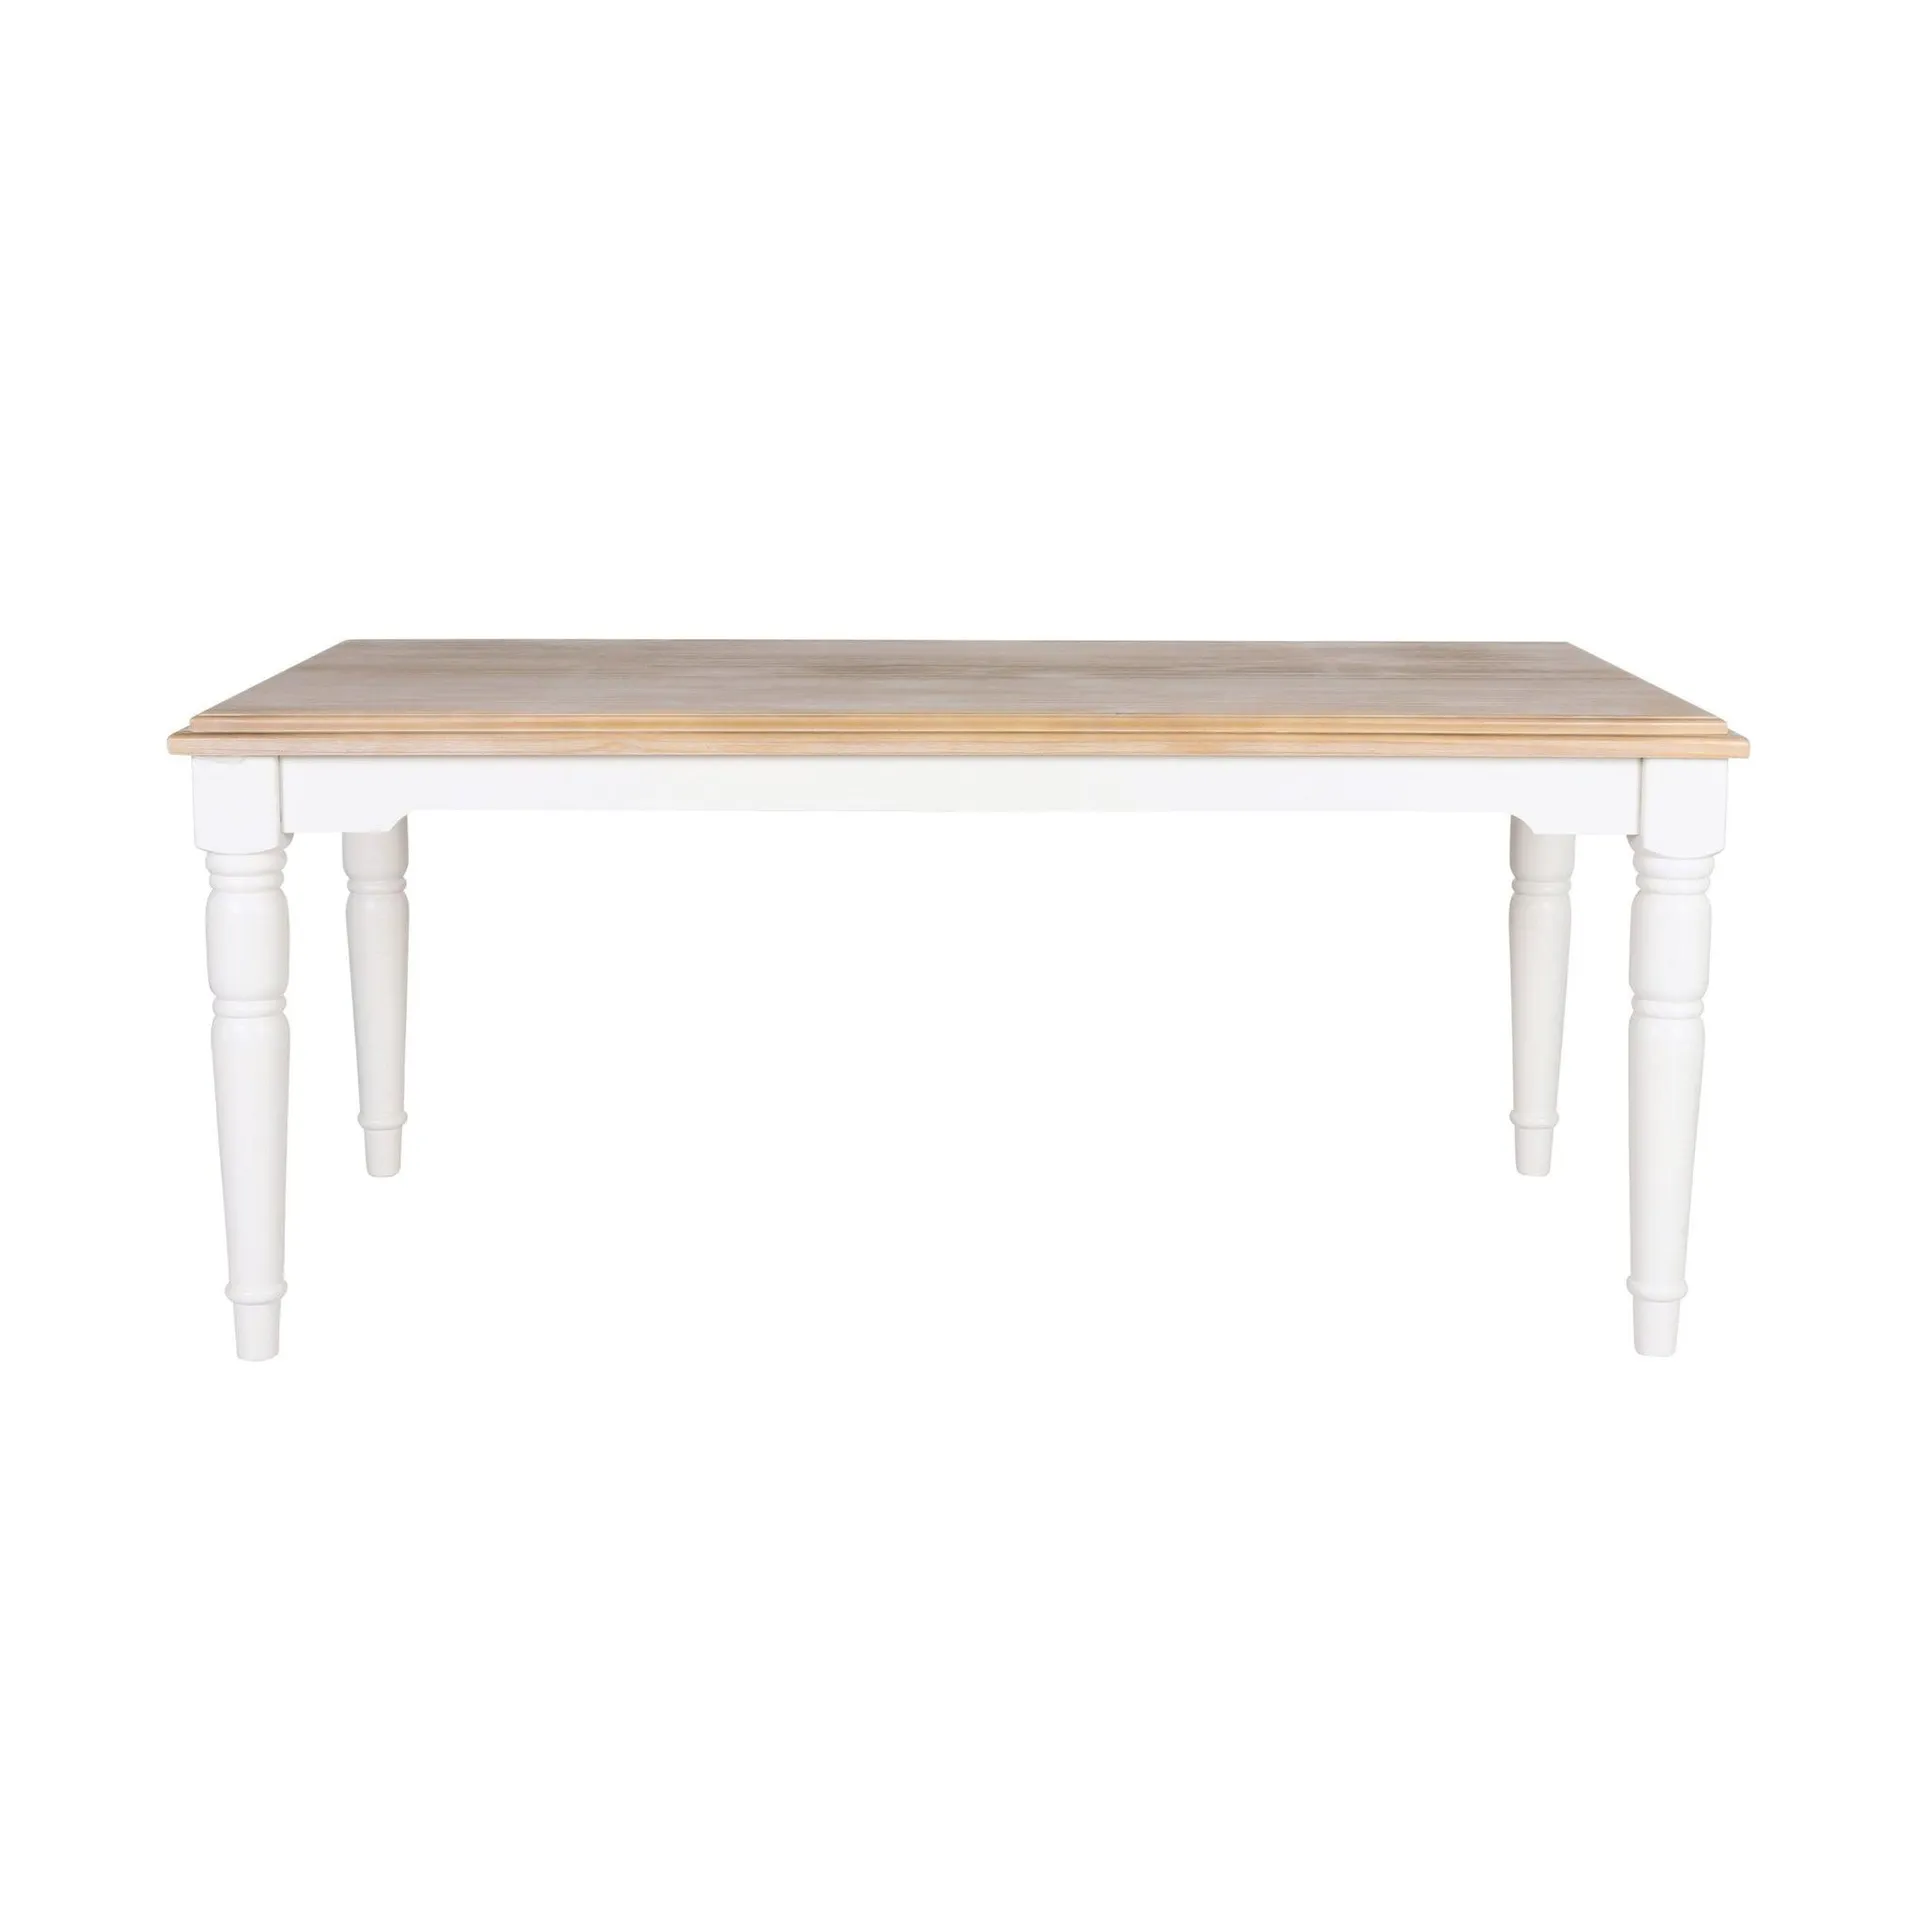 Clover Timber Dining Table 180cm